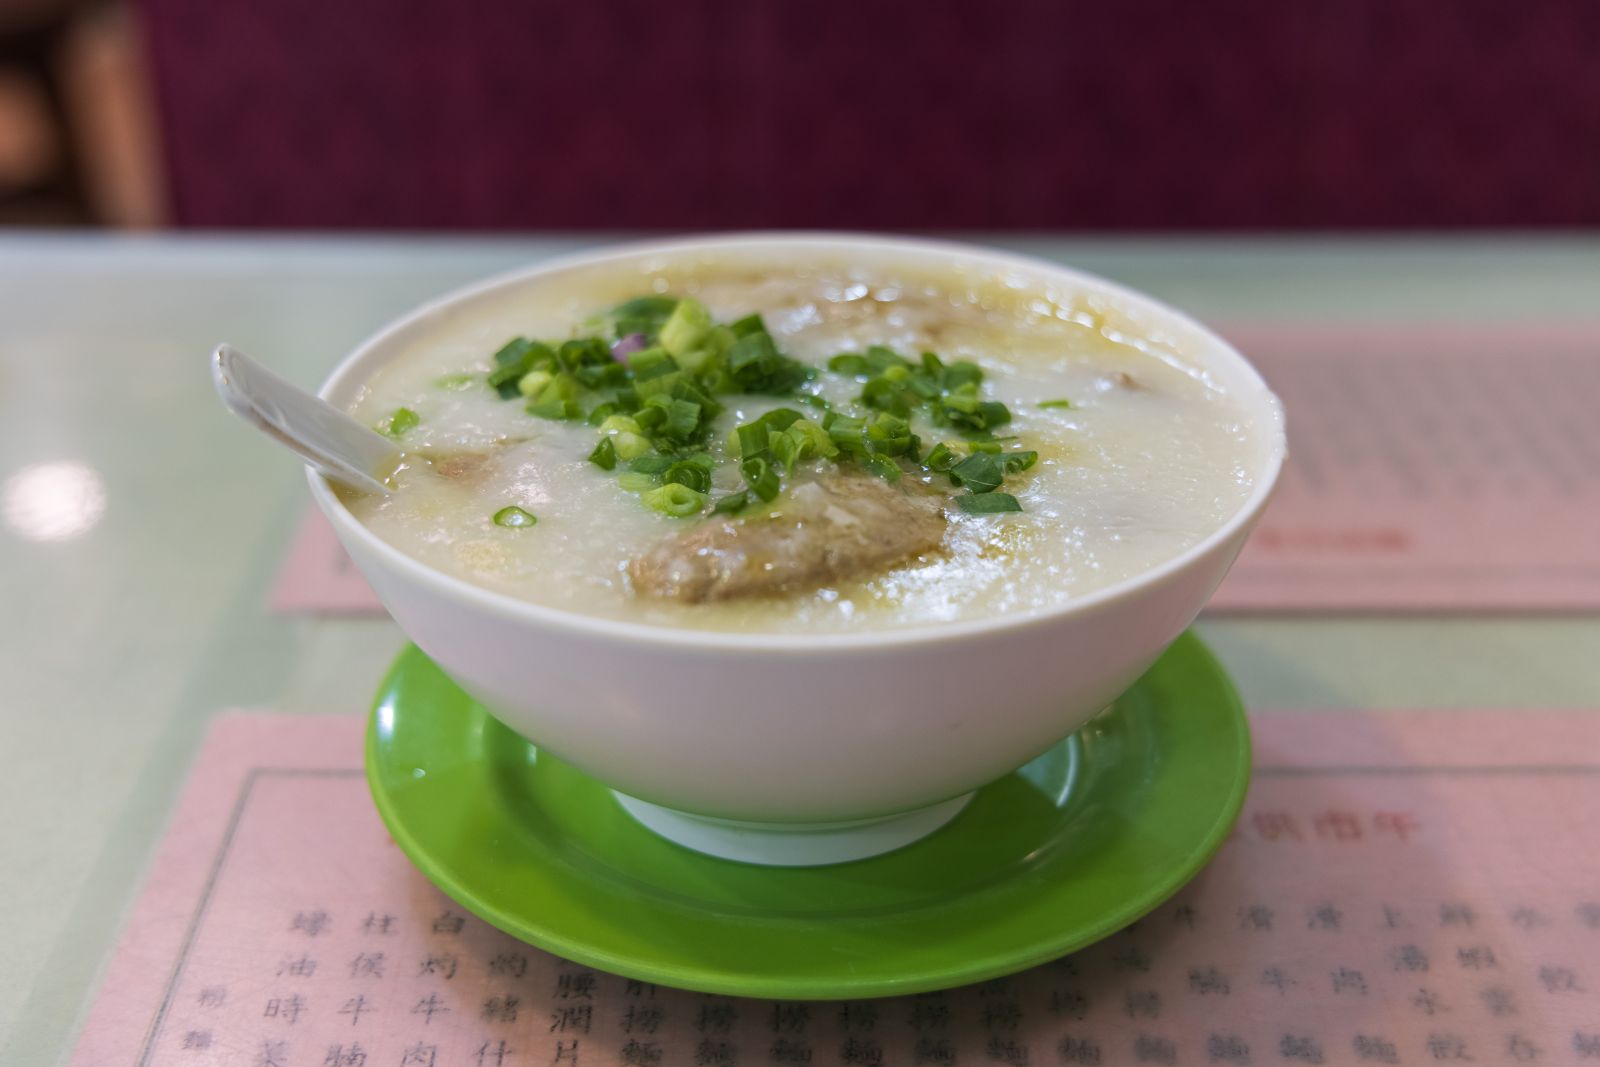 Congee - A comfort food for the locals